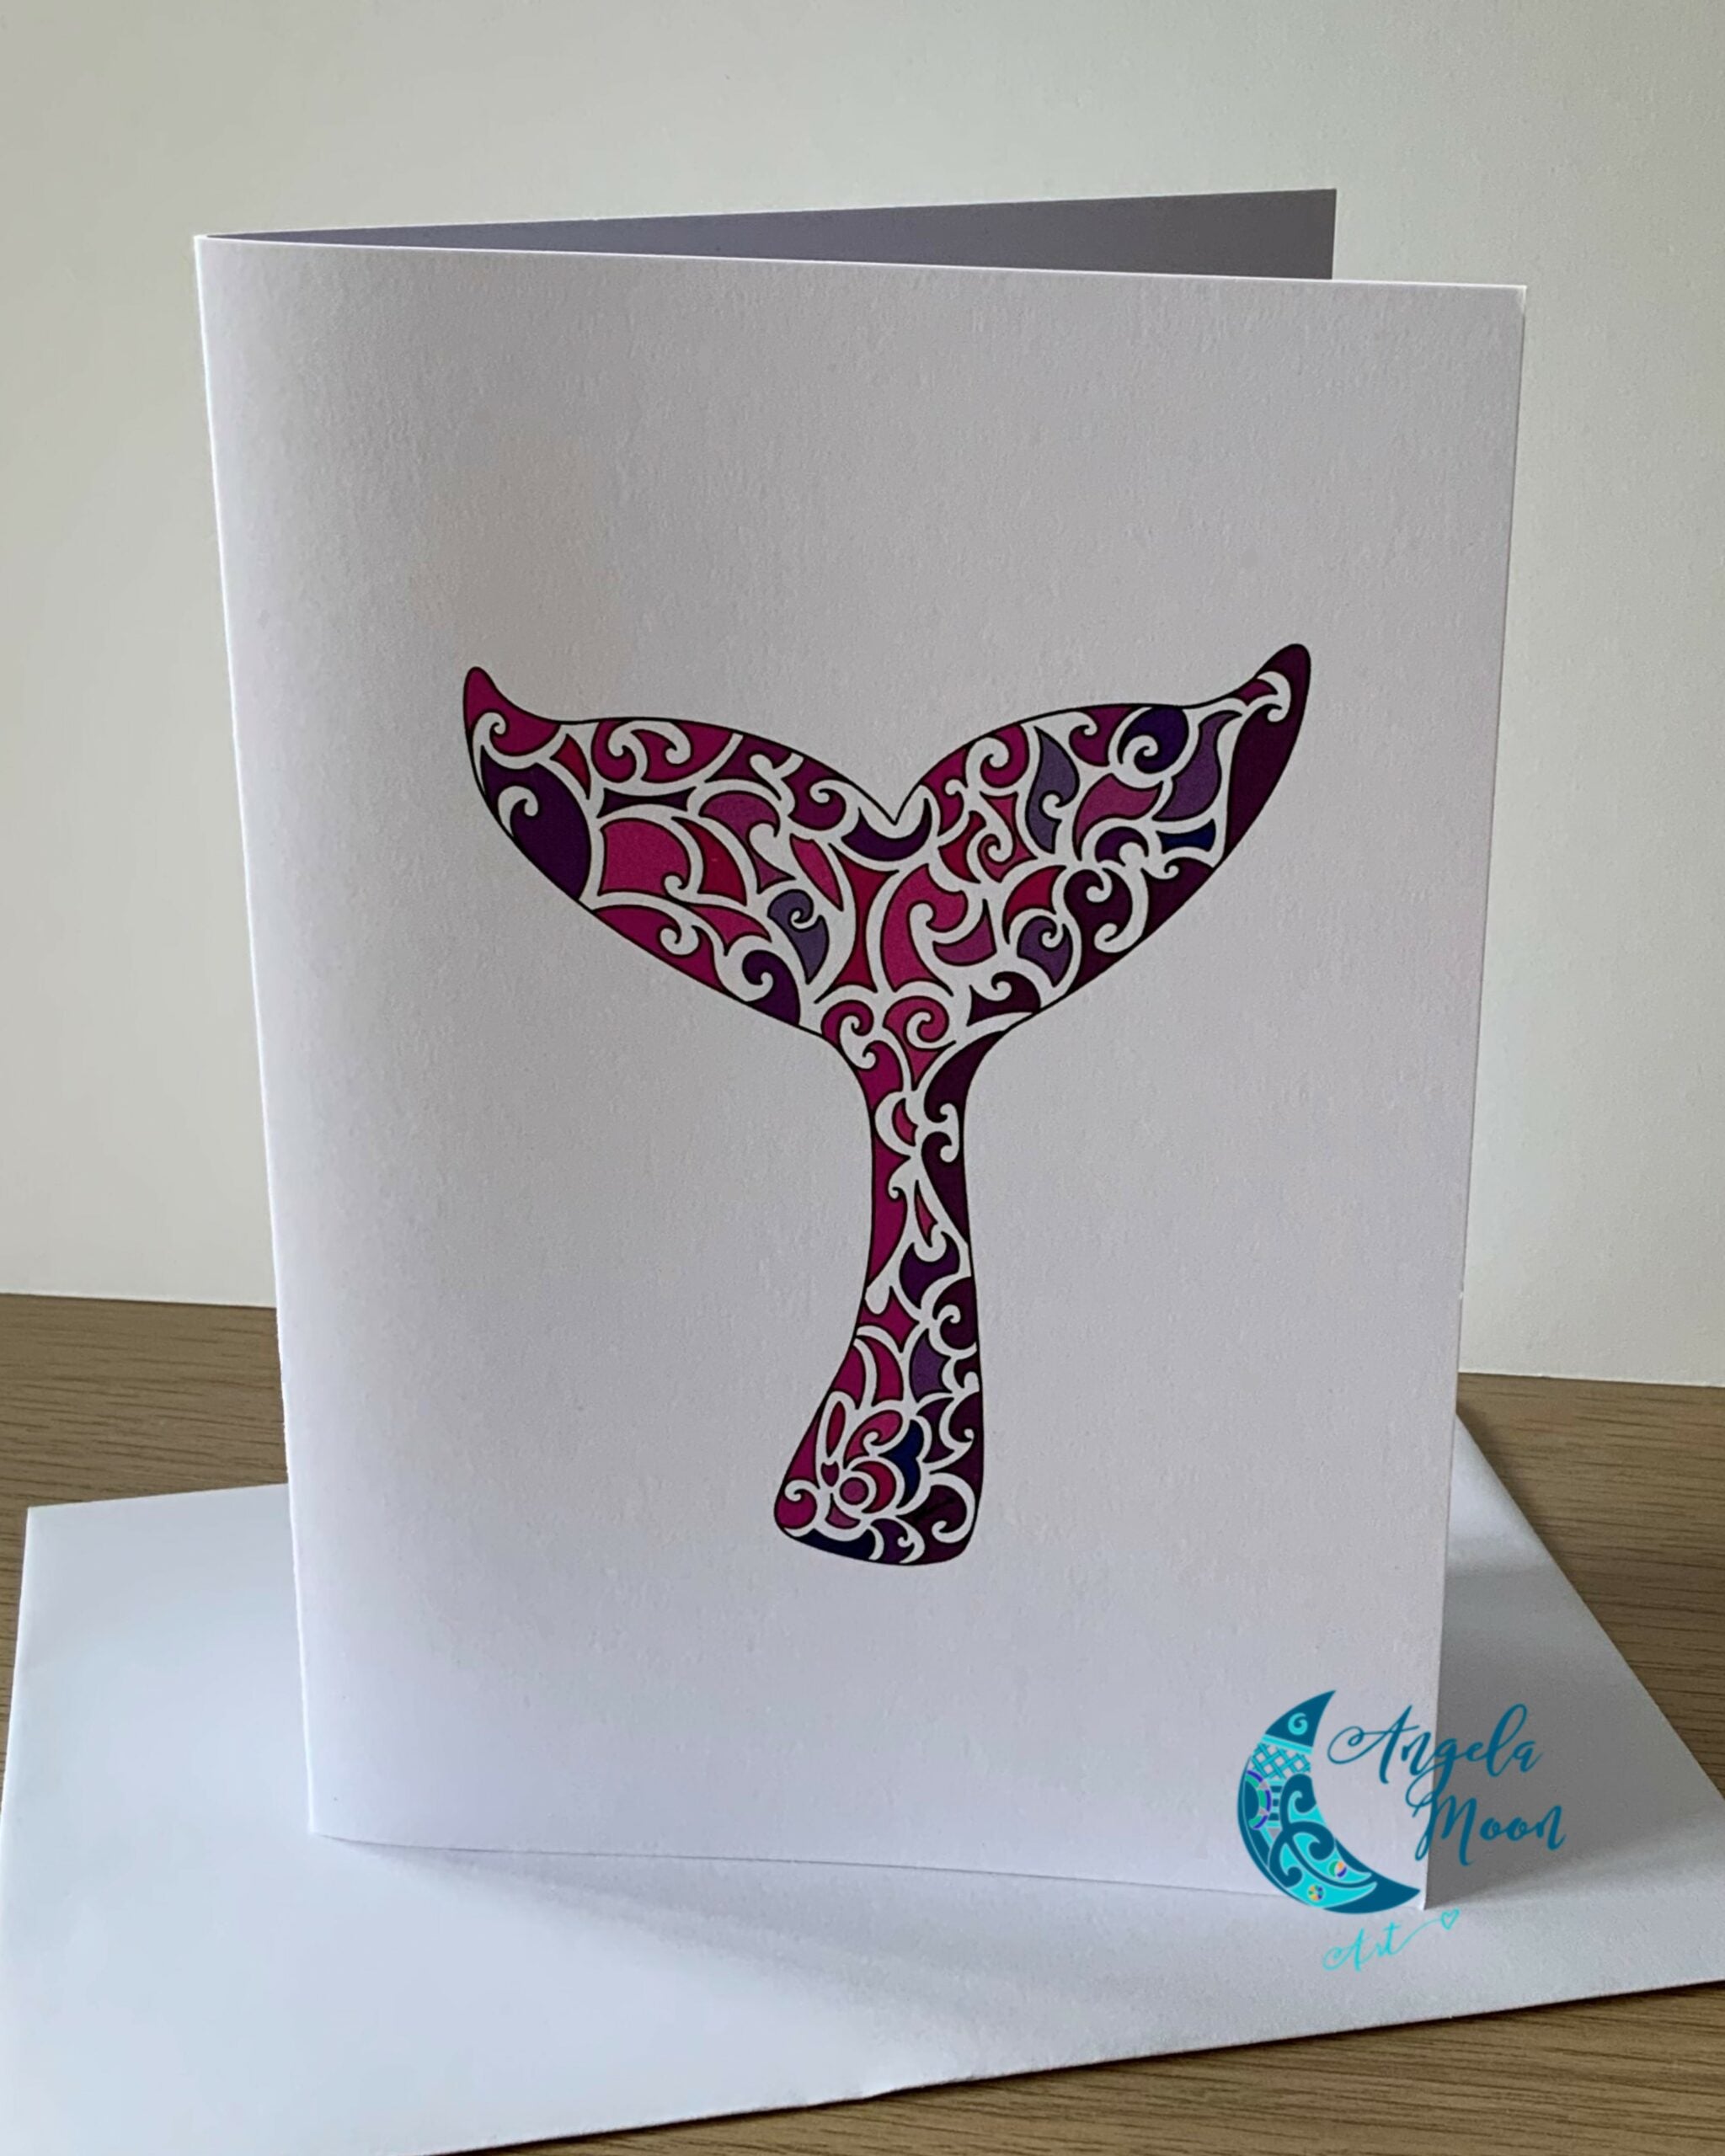 Elegantly designed Pink Whale Tail Card, a product of Angela Moon Art, with a cut-out of a whale tail, featuring intricate purple and pink swirl patterns, accompanied by the artist's signature at the bottom right